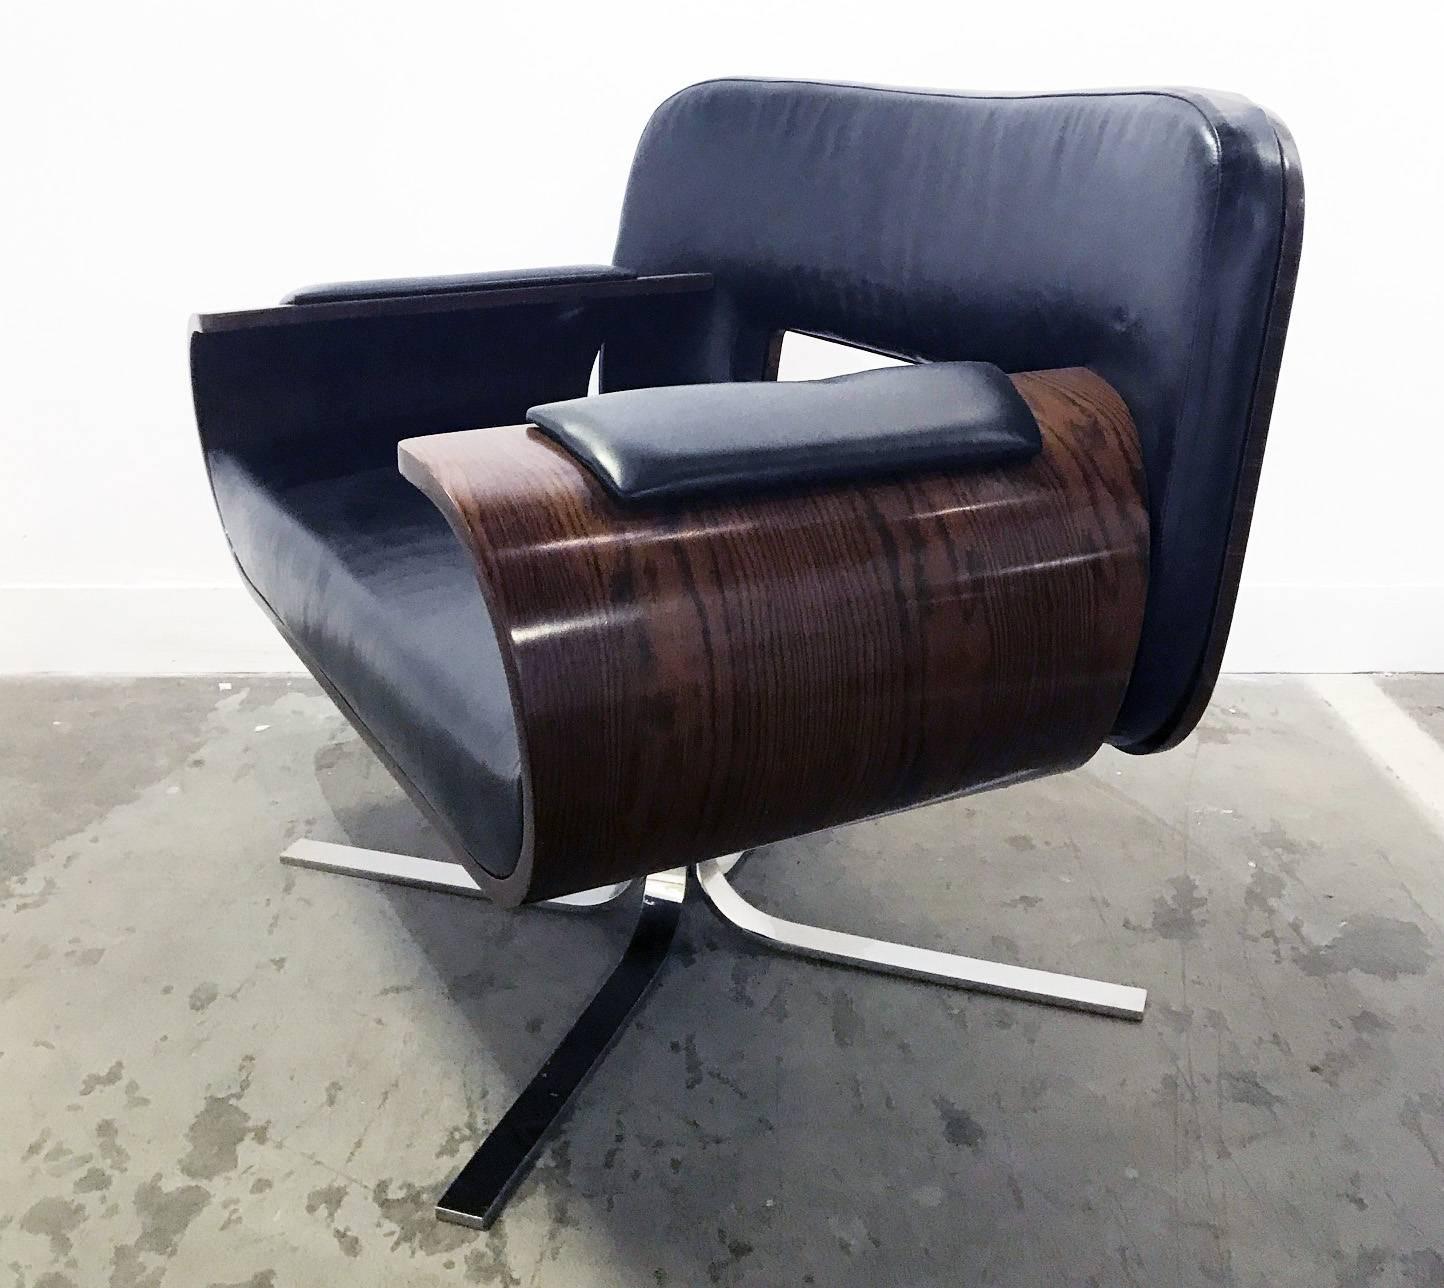 Brazilian Rosewood Lounge Chair by Jorge Zalszupin In Excellent Condition For Sale In Hudson, NY